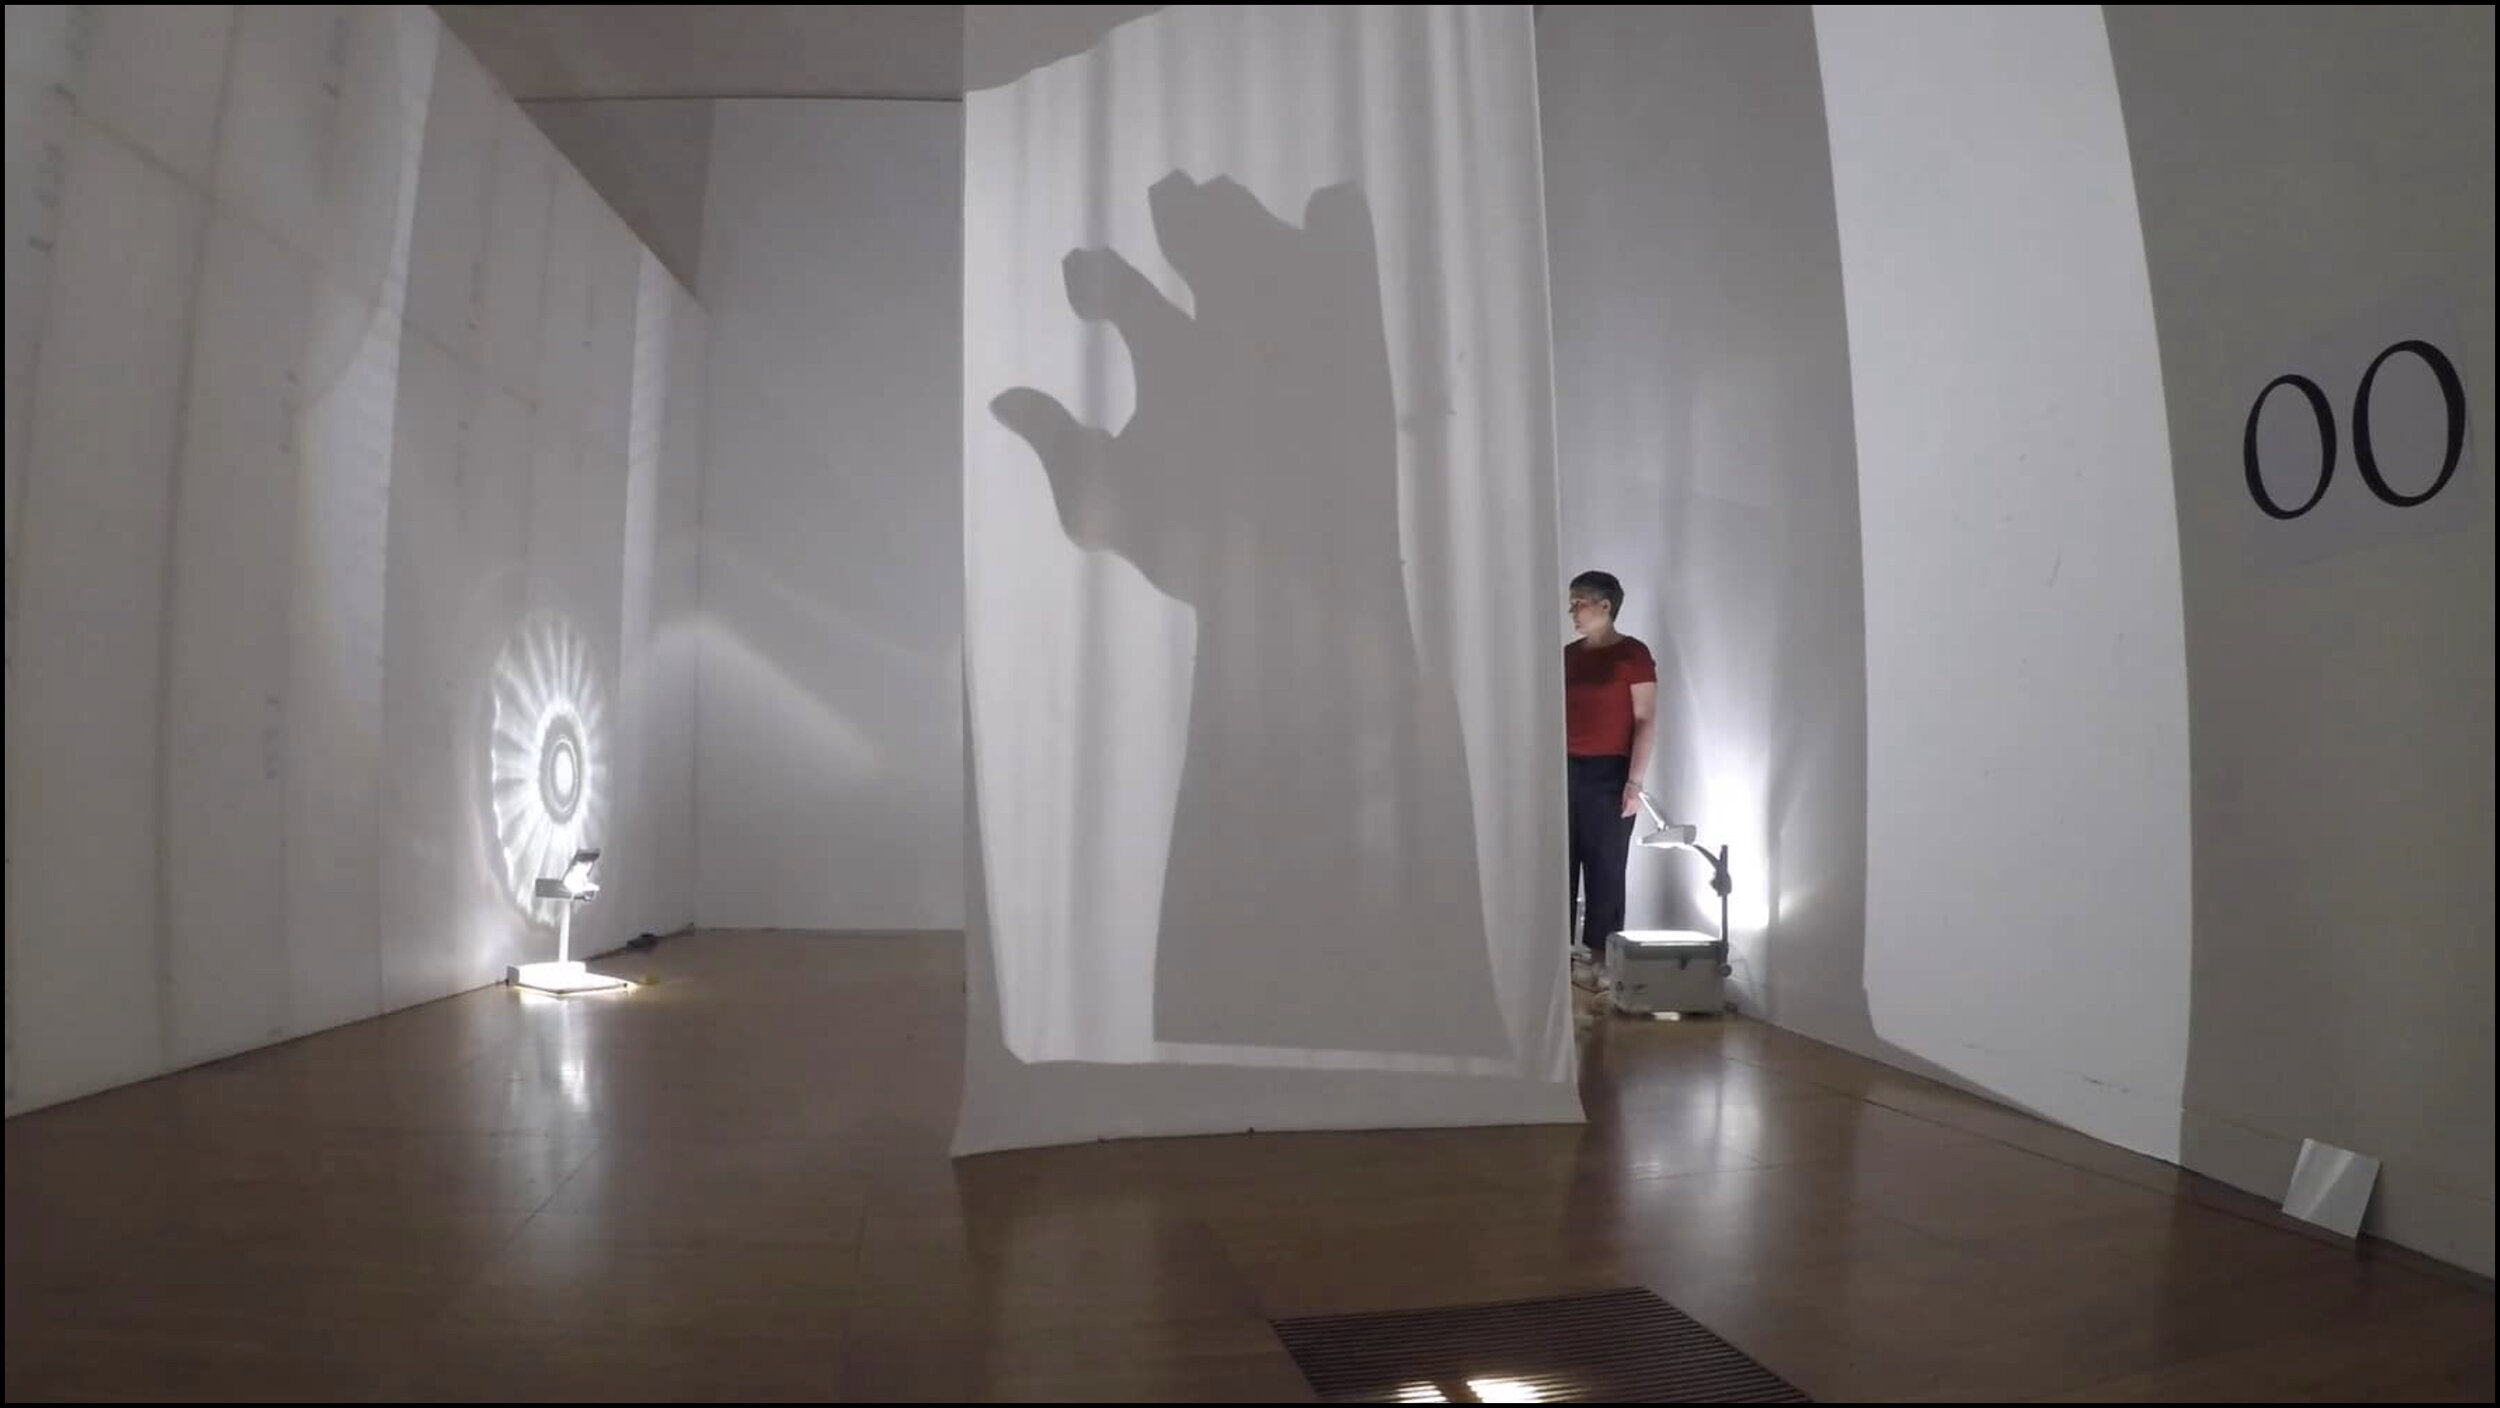 Roger Suckling: A Pool of Light/Belen Cerezo. The Collection, Lincoln. Video, 2019